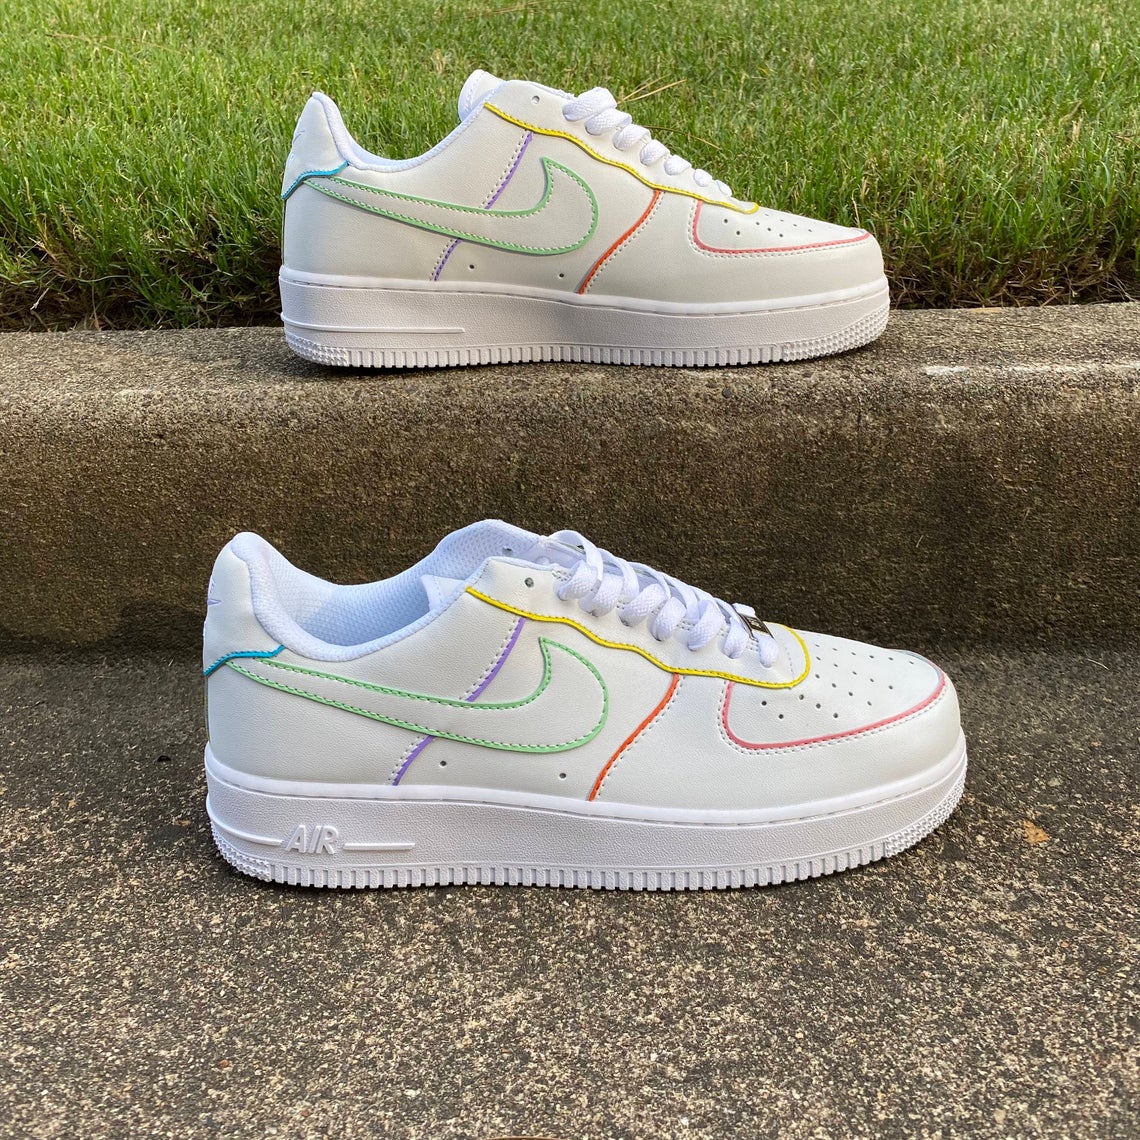 Nike Air Force 1 Custom Shoes Beach Yellow Orange Pink Salmon Sneakers All  Sizes